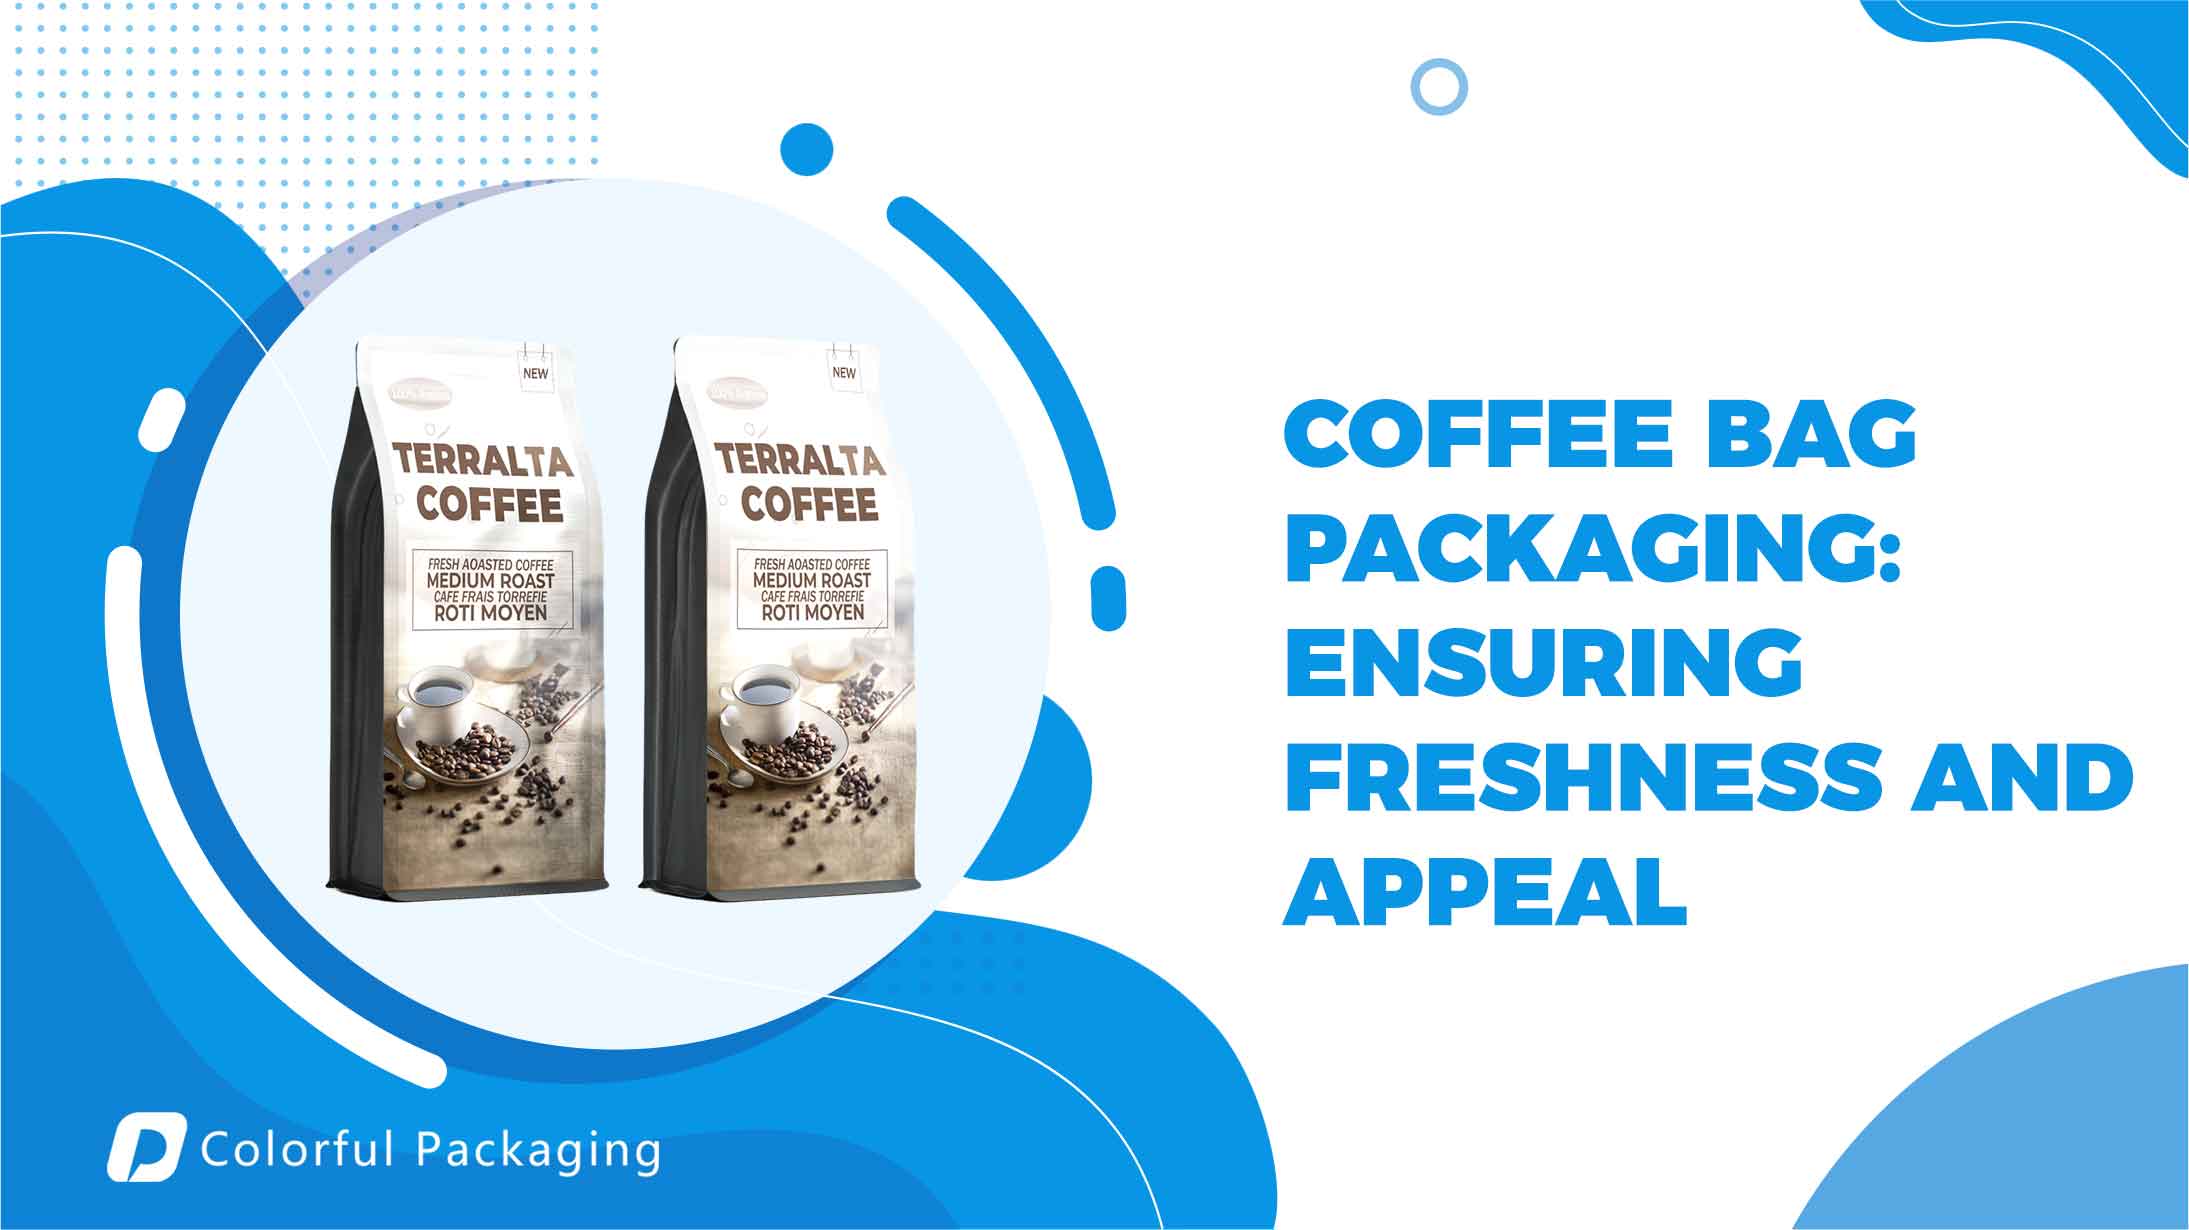 Coffee Bag Packaging: Ensuring Freshness and Appeal